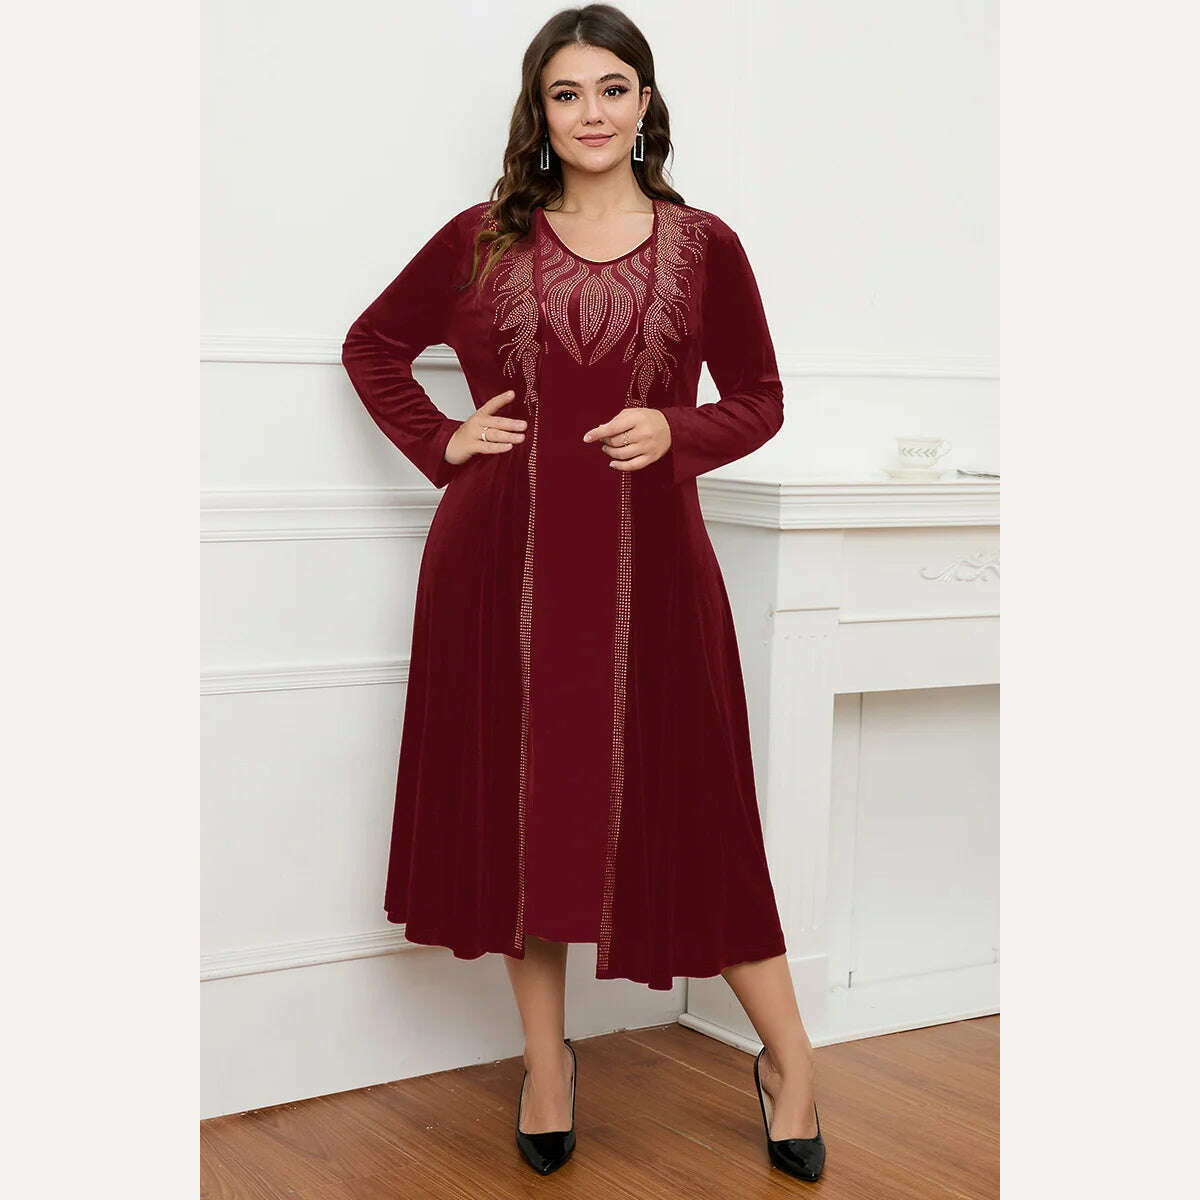 KIMLUD, Women's Plus Size Dress Two Piece Dress Set Velvet Autumn Printing Round Neck Casual Elegant Tank Dress and Long Jacket Outfit, Red / 5XL, KIMLUD Women's Clothes